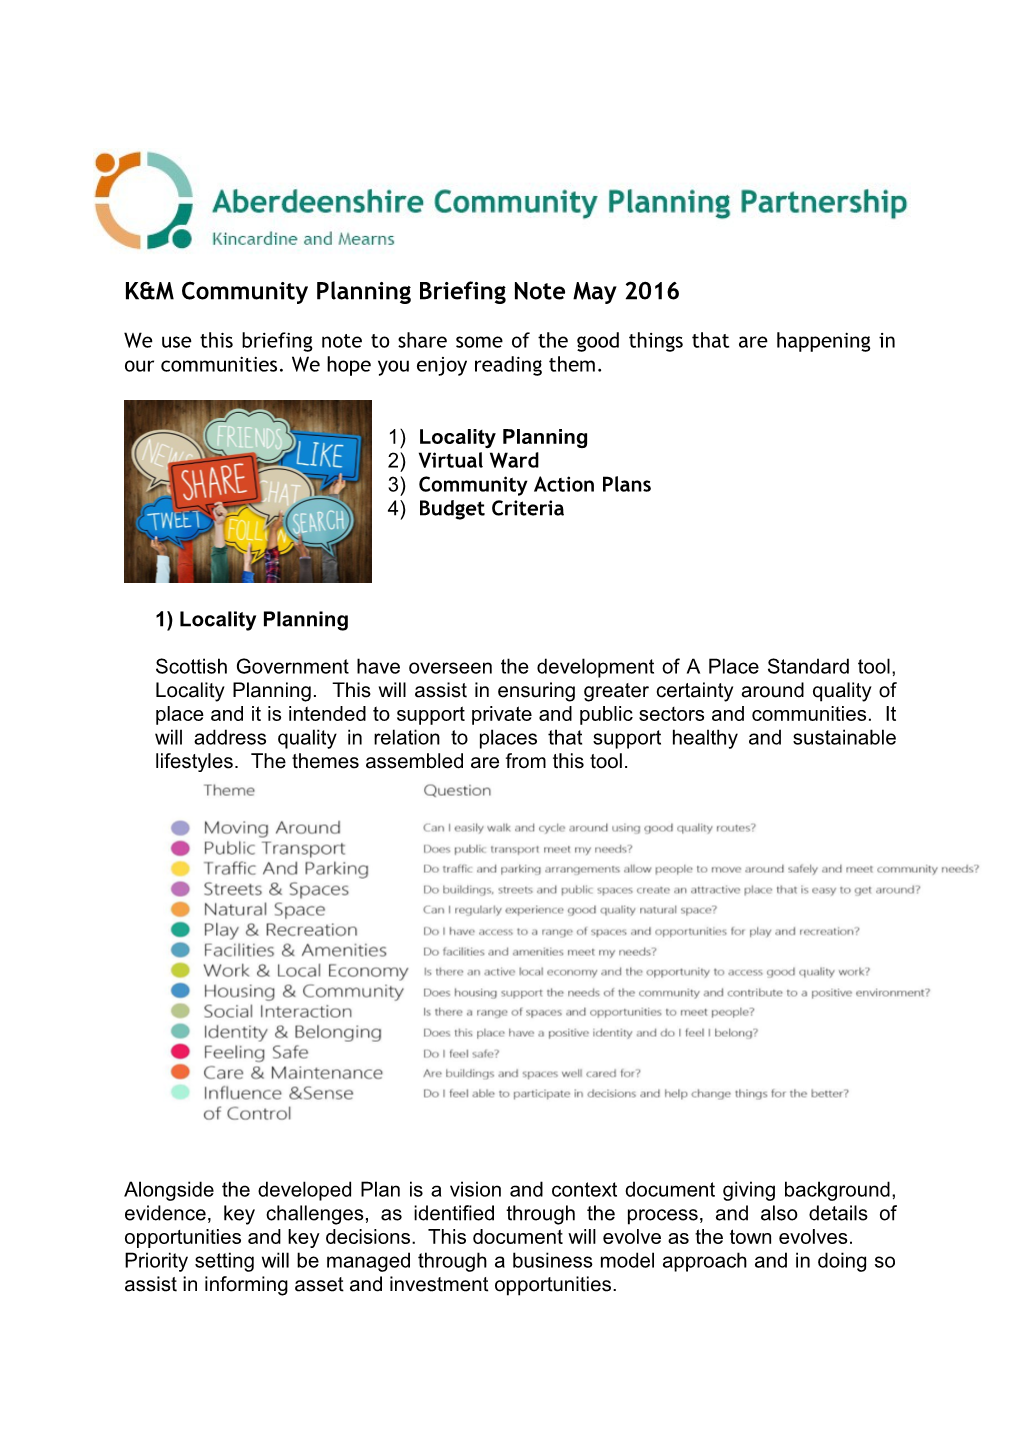 K&M Community Planning Briefing Note May 2016